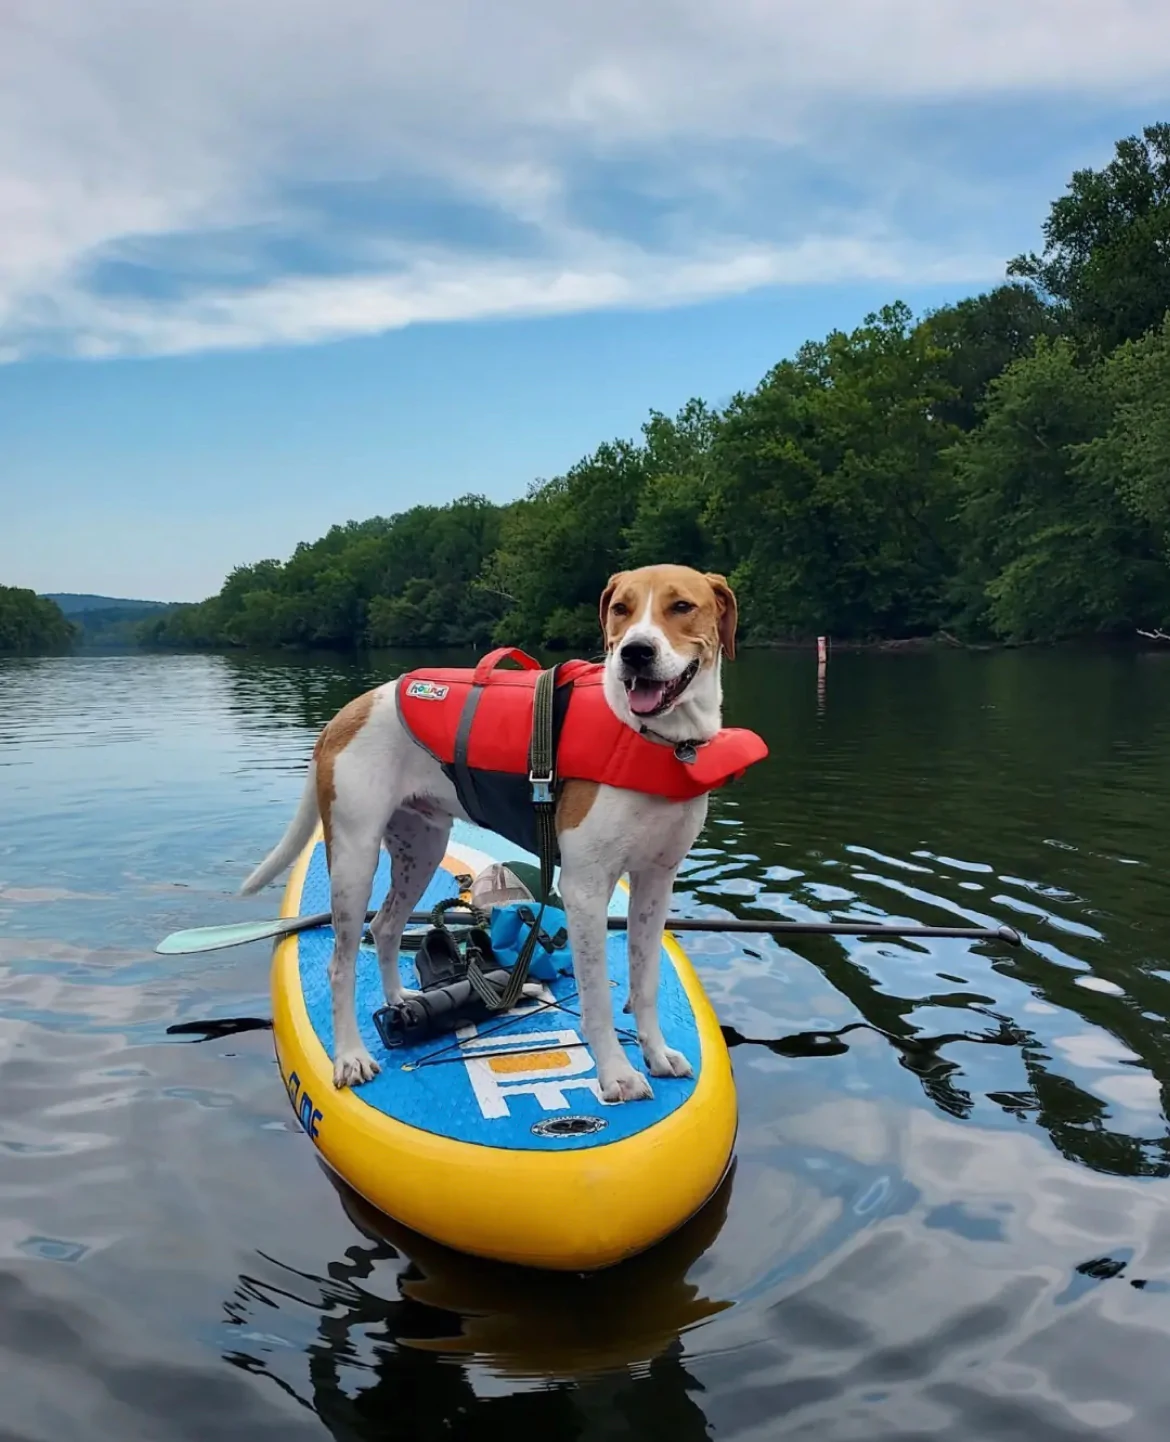 A pup on a sup in a paddle boarding life jacket. Take note of the handle on the life jacket.